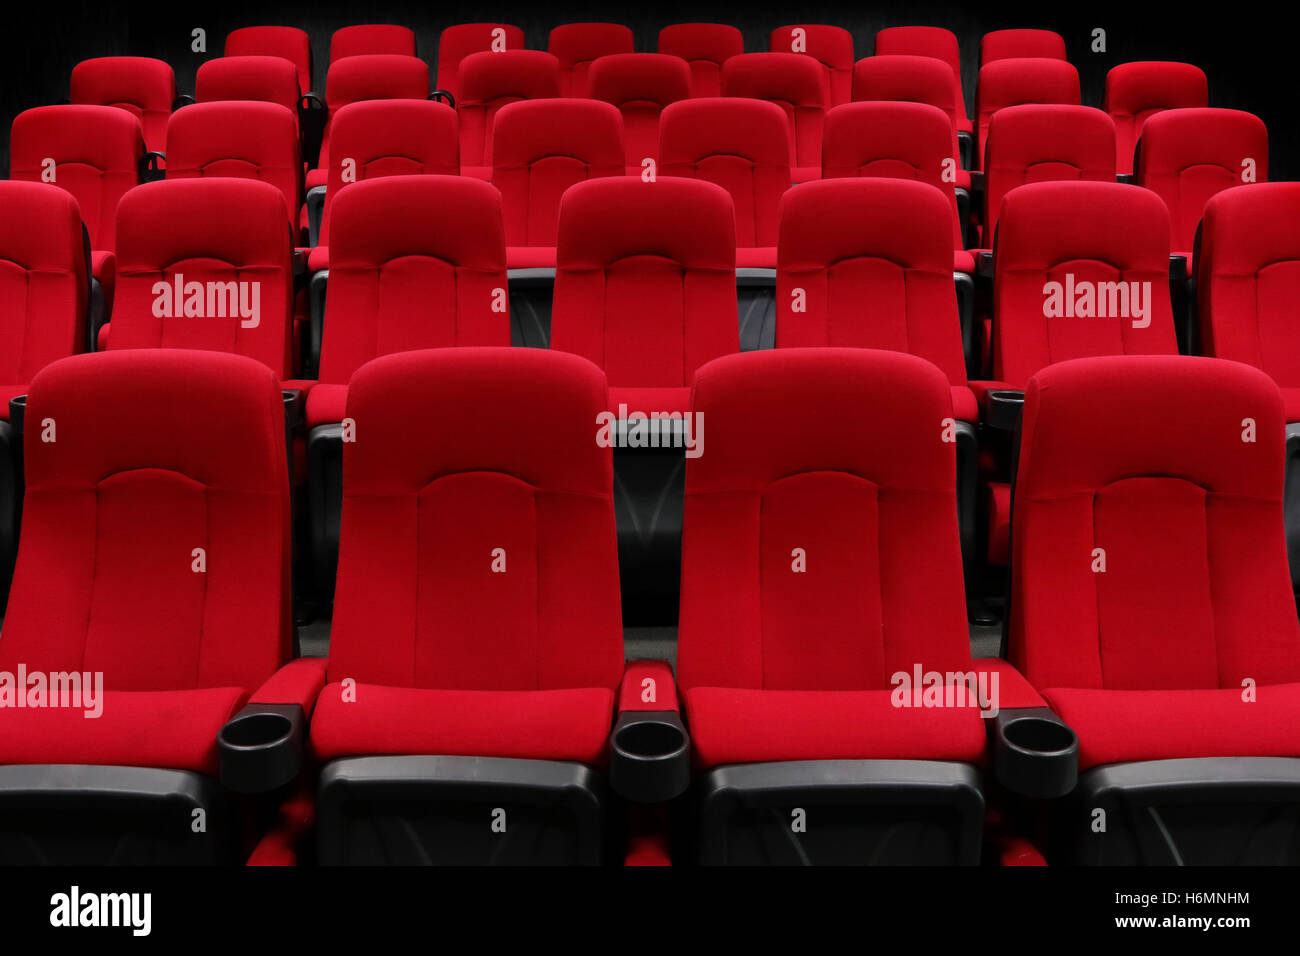 Empty theater auditorium or cinema with red seats Stock Photo